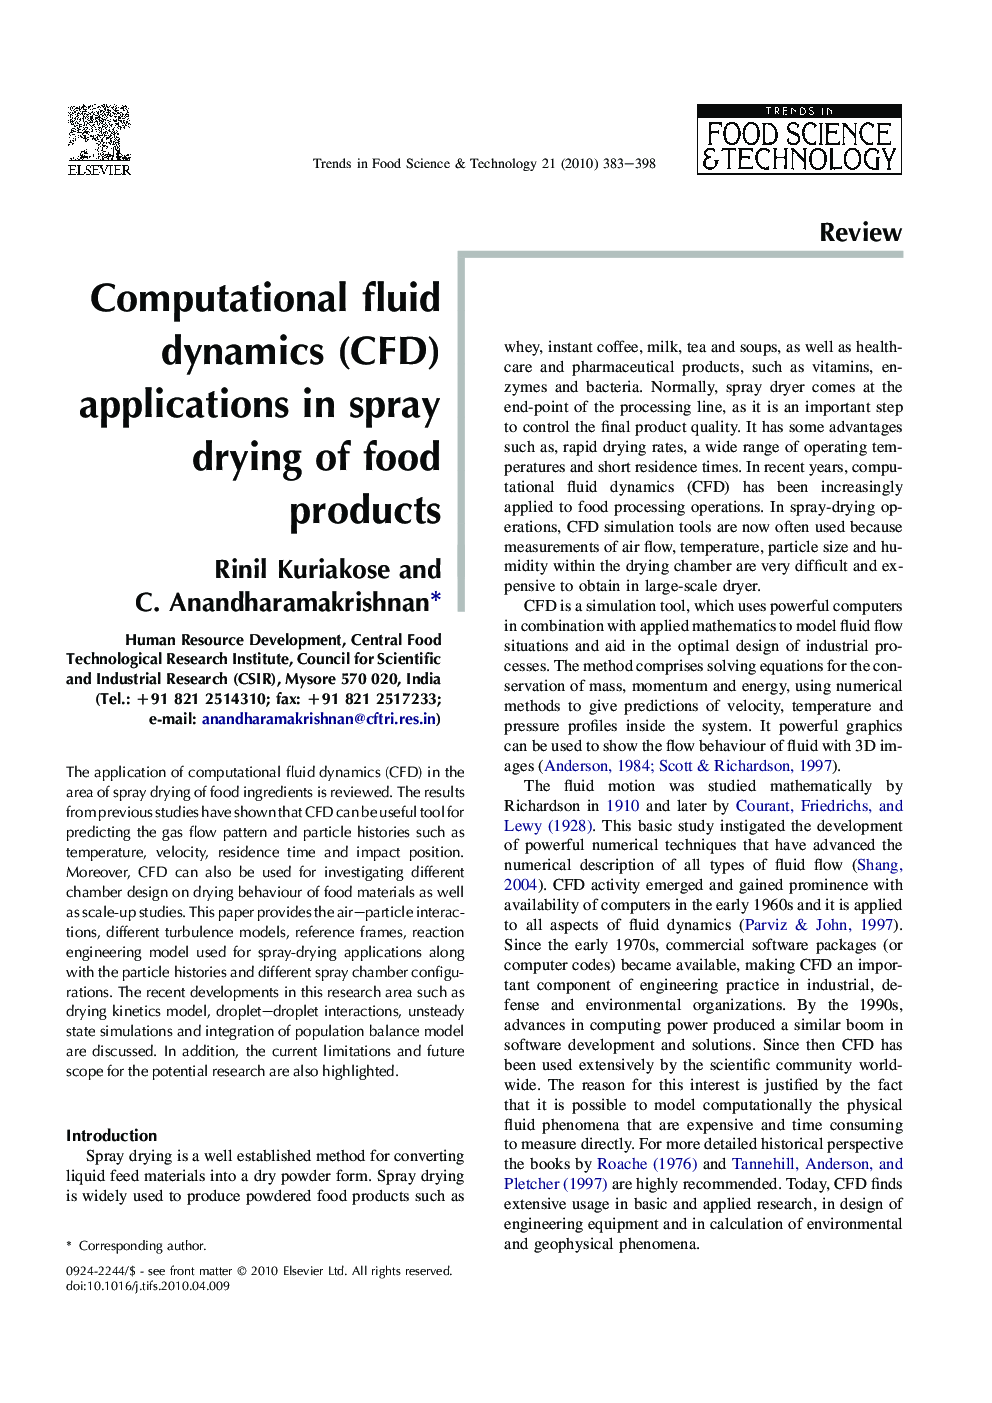 Computational fluid dynamics (CFD) applications in spray drying of food products